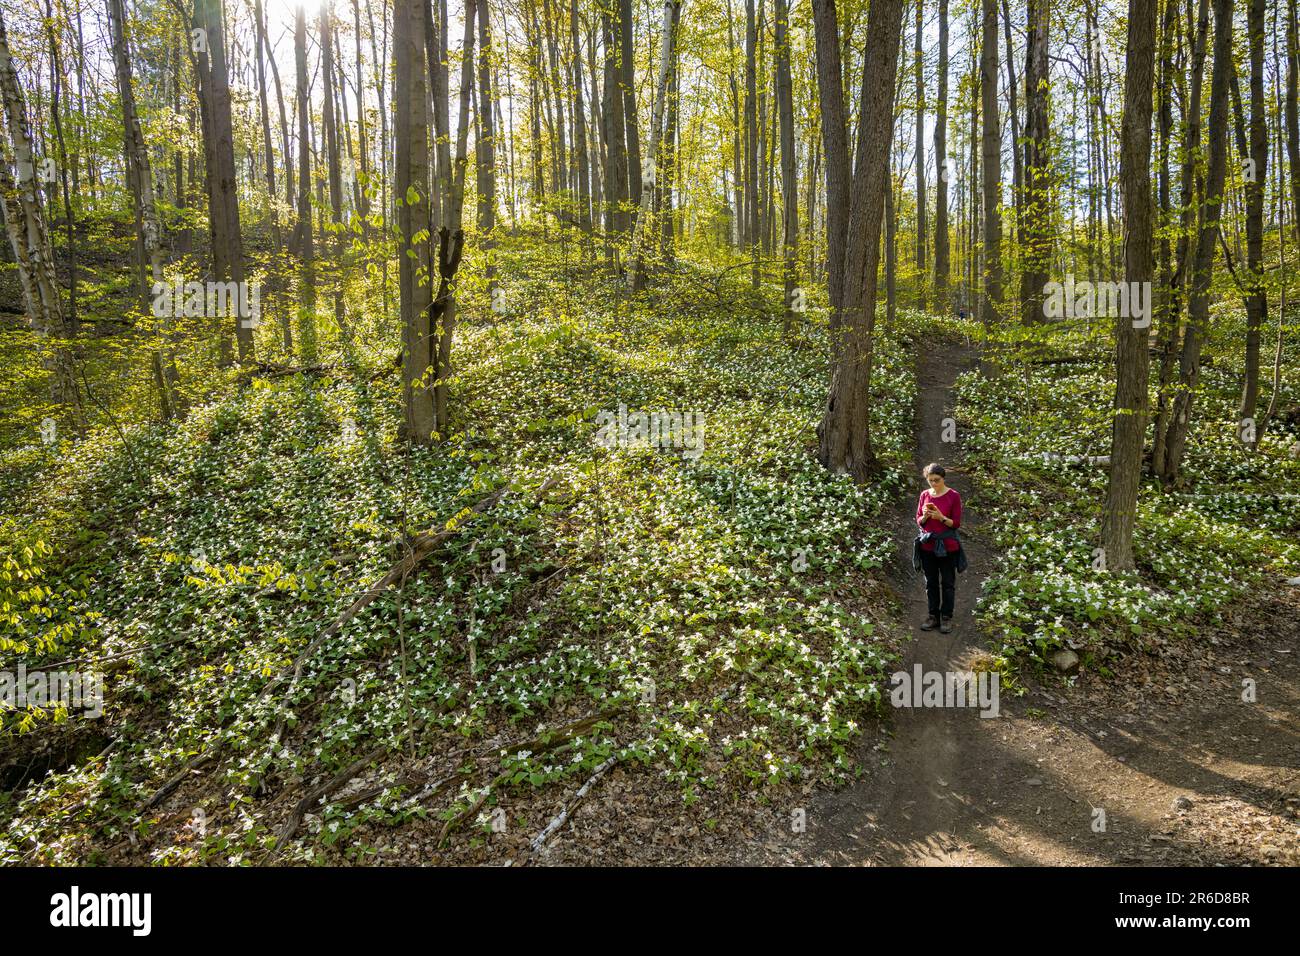 A woman walking in forested hillside with thousands of Wild Trilliums. Stock Photo